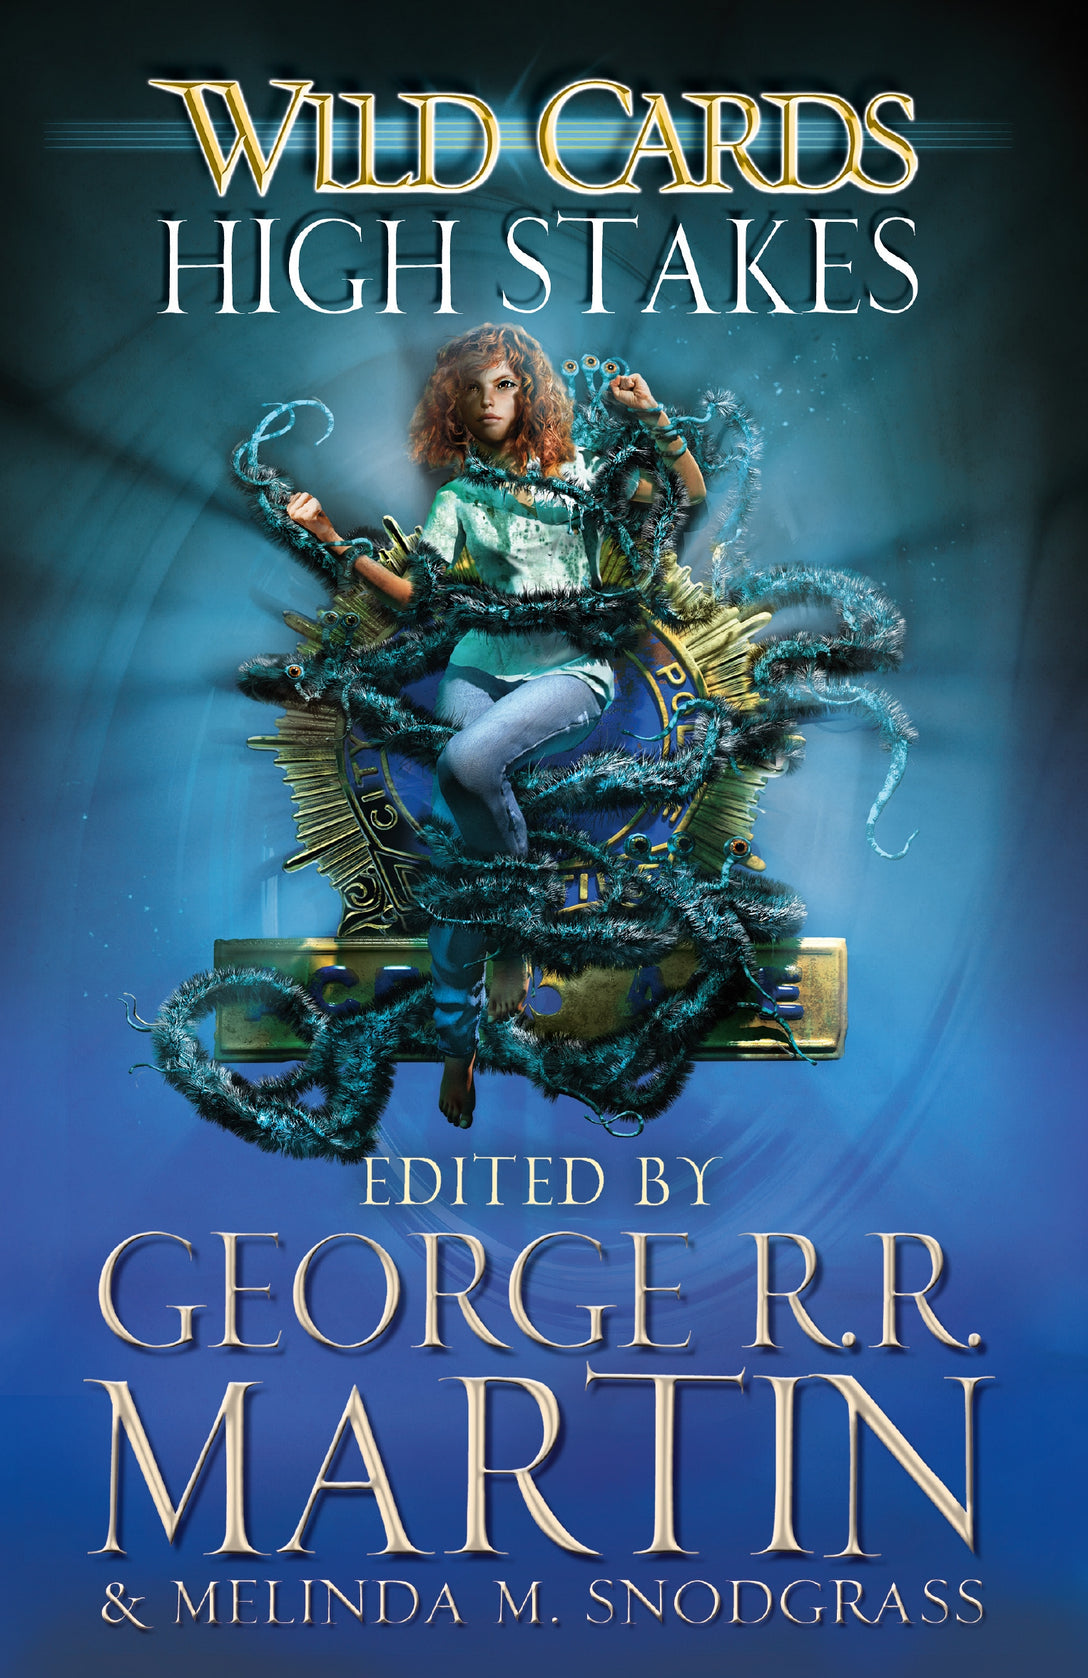 Wild Cards: High Stakes by George R.R. Martin